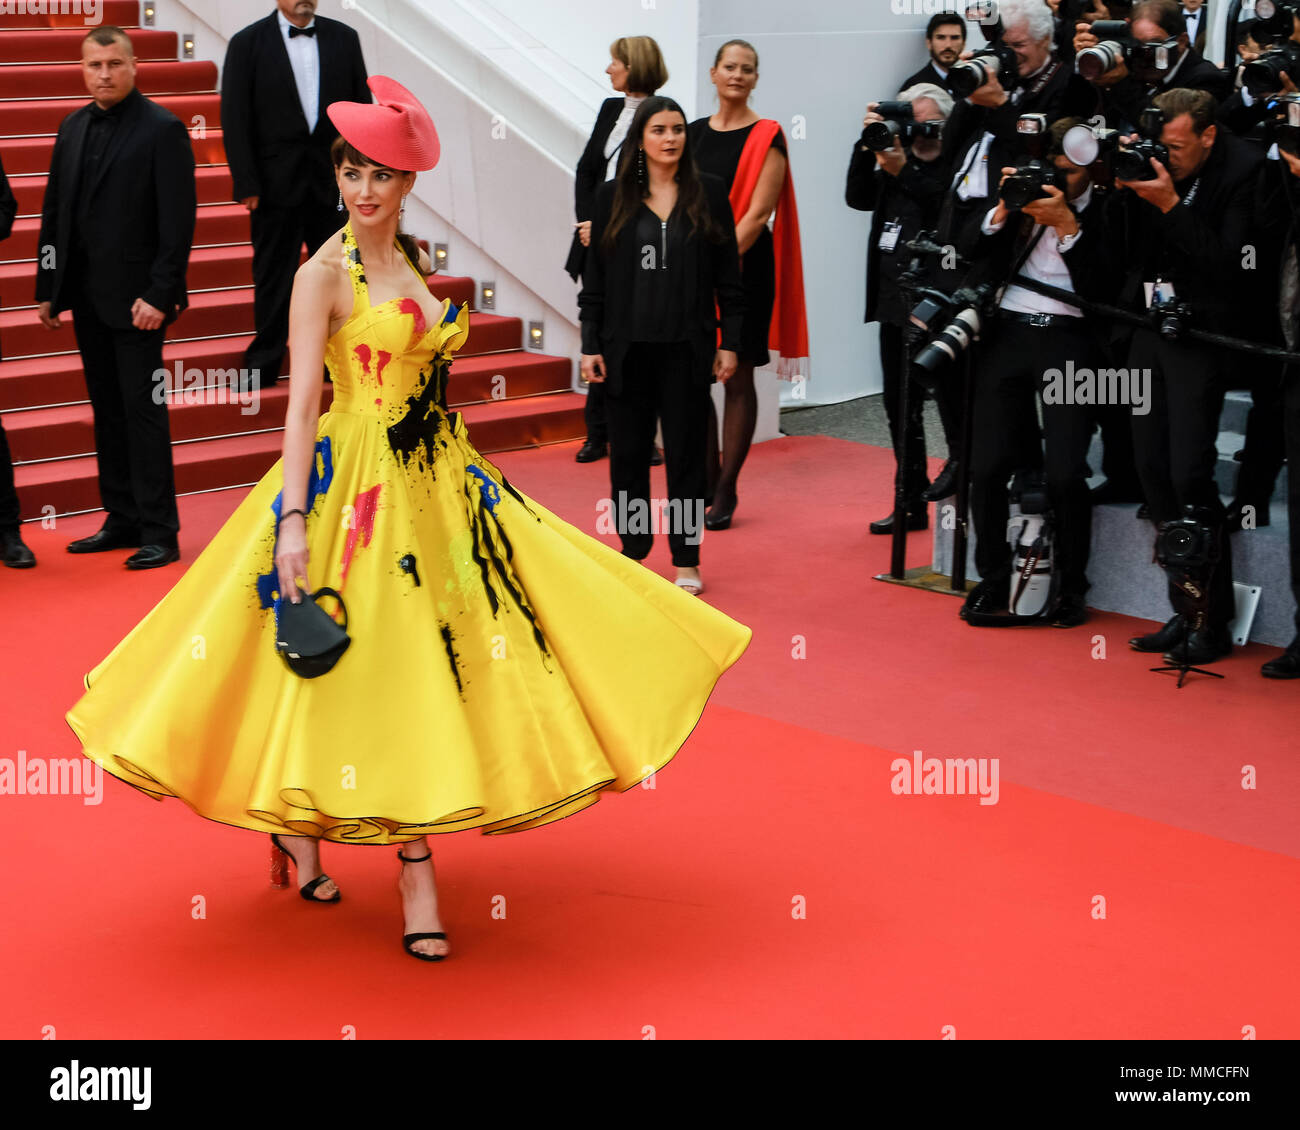 Cannes, France. 10th May, 2018. Frederique Bel at the Sorry Angel Red Carpet Event on Thursday 10 May 2018 as part of the 71st International Cannes Film Festival held at Palais des Festivals, Cannes. The French title of the film is Plaire, aimer et courir vite . Pictured: Frederique Bel. Picture by Credit: Julie Edwards/Alamy Live News Stock Photo